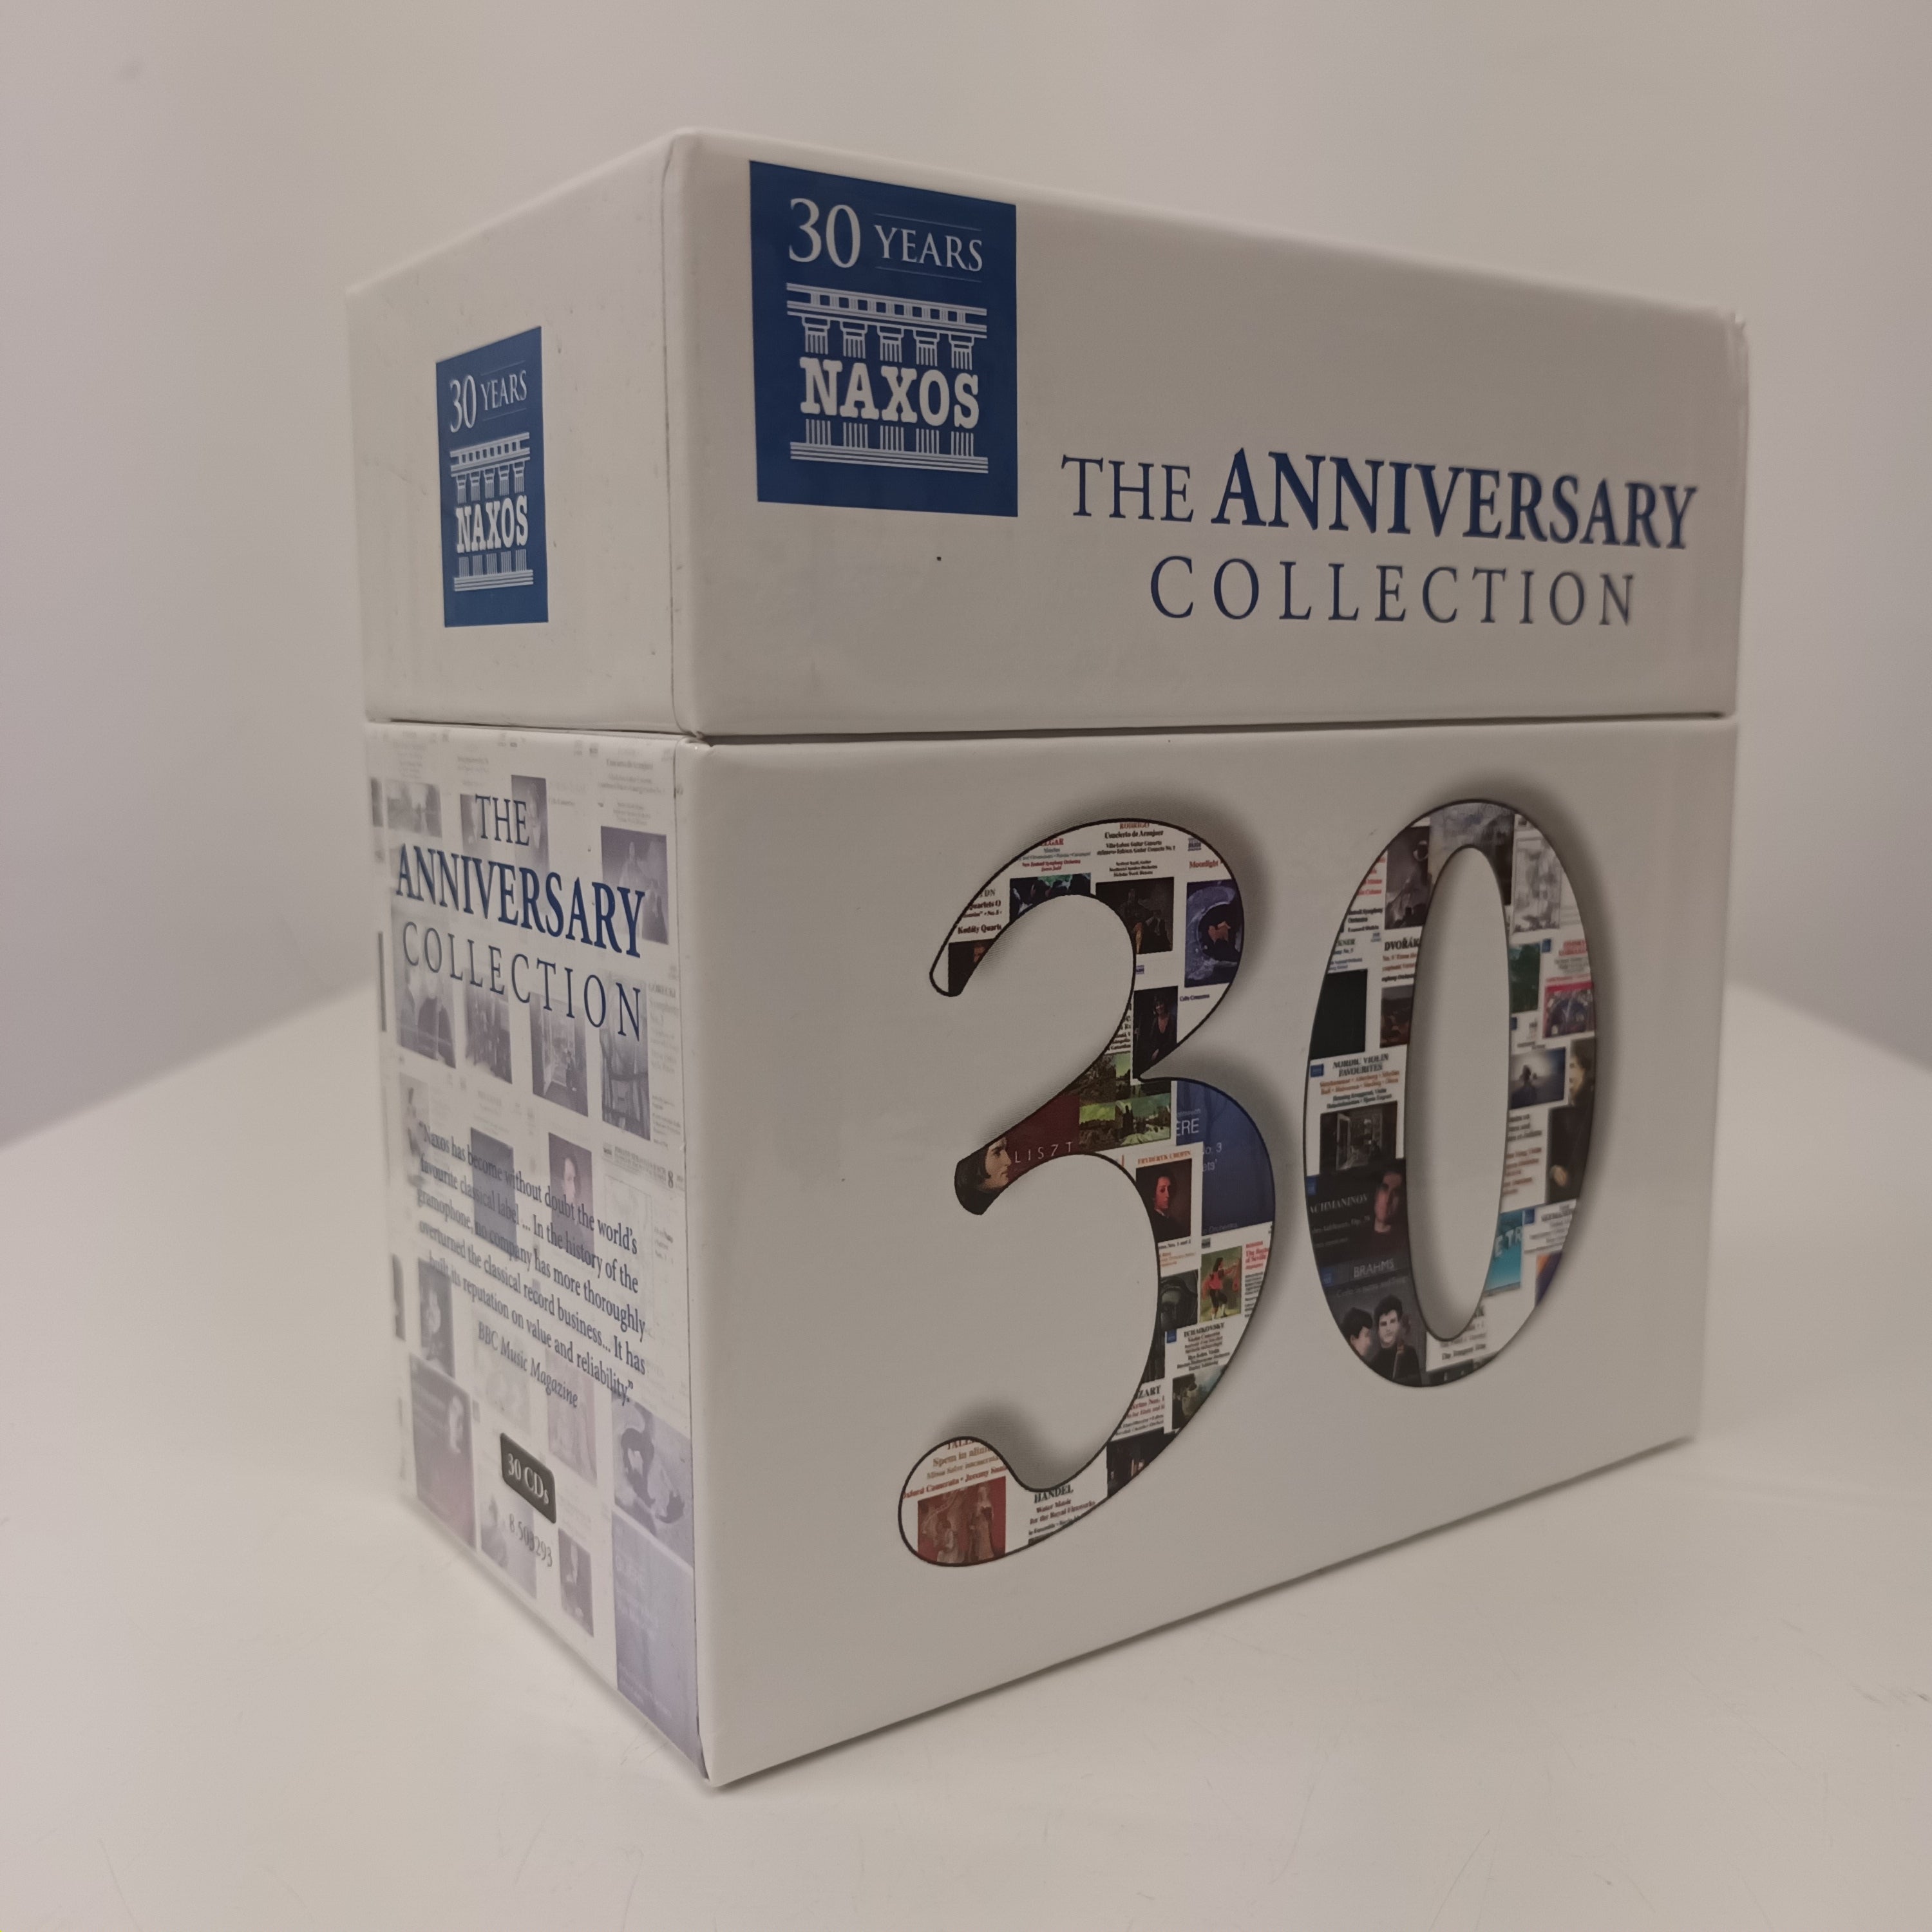 30 Years Of Naxos The Anniversary Collection CD Boxset – Shop for 